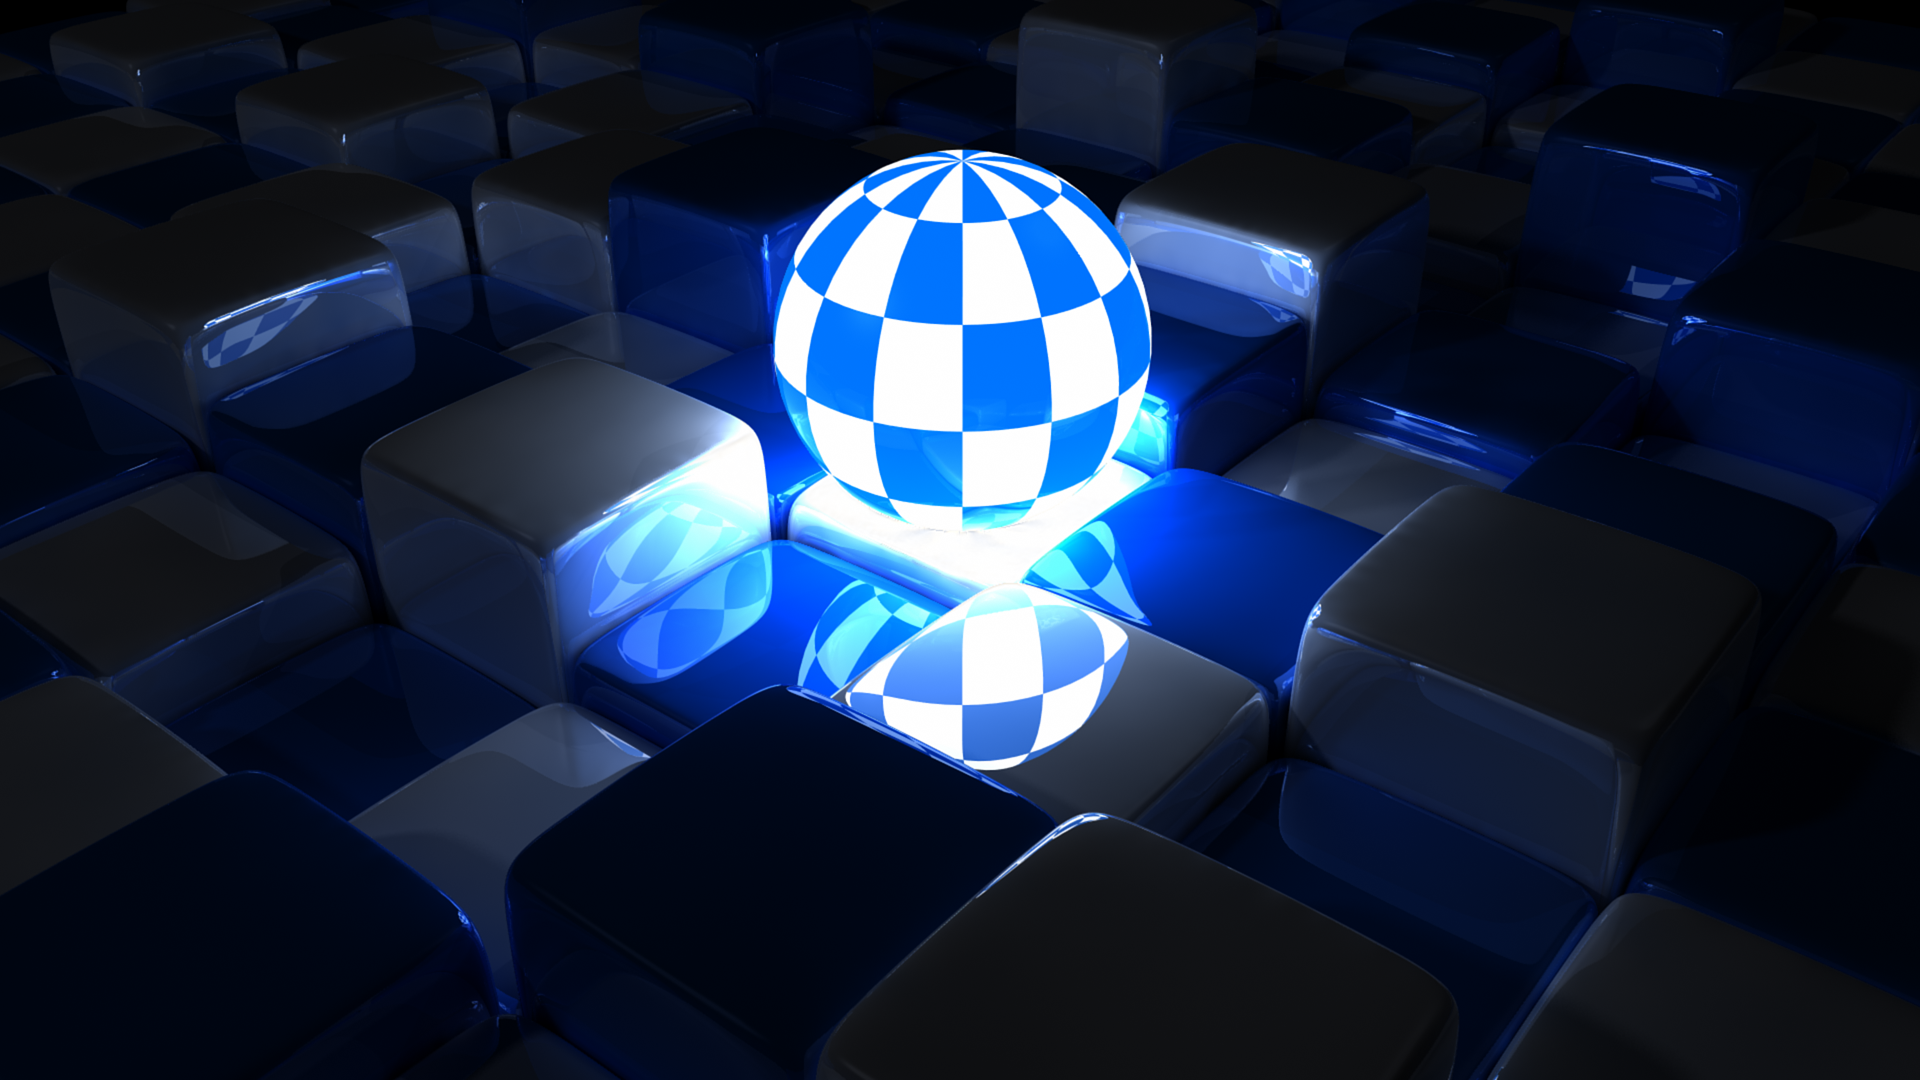 Luminous Sphere Among Cubes Wallpaper And Image